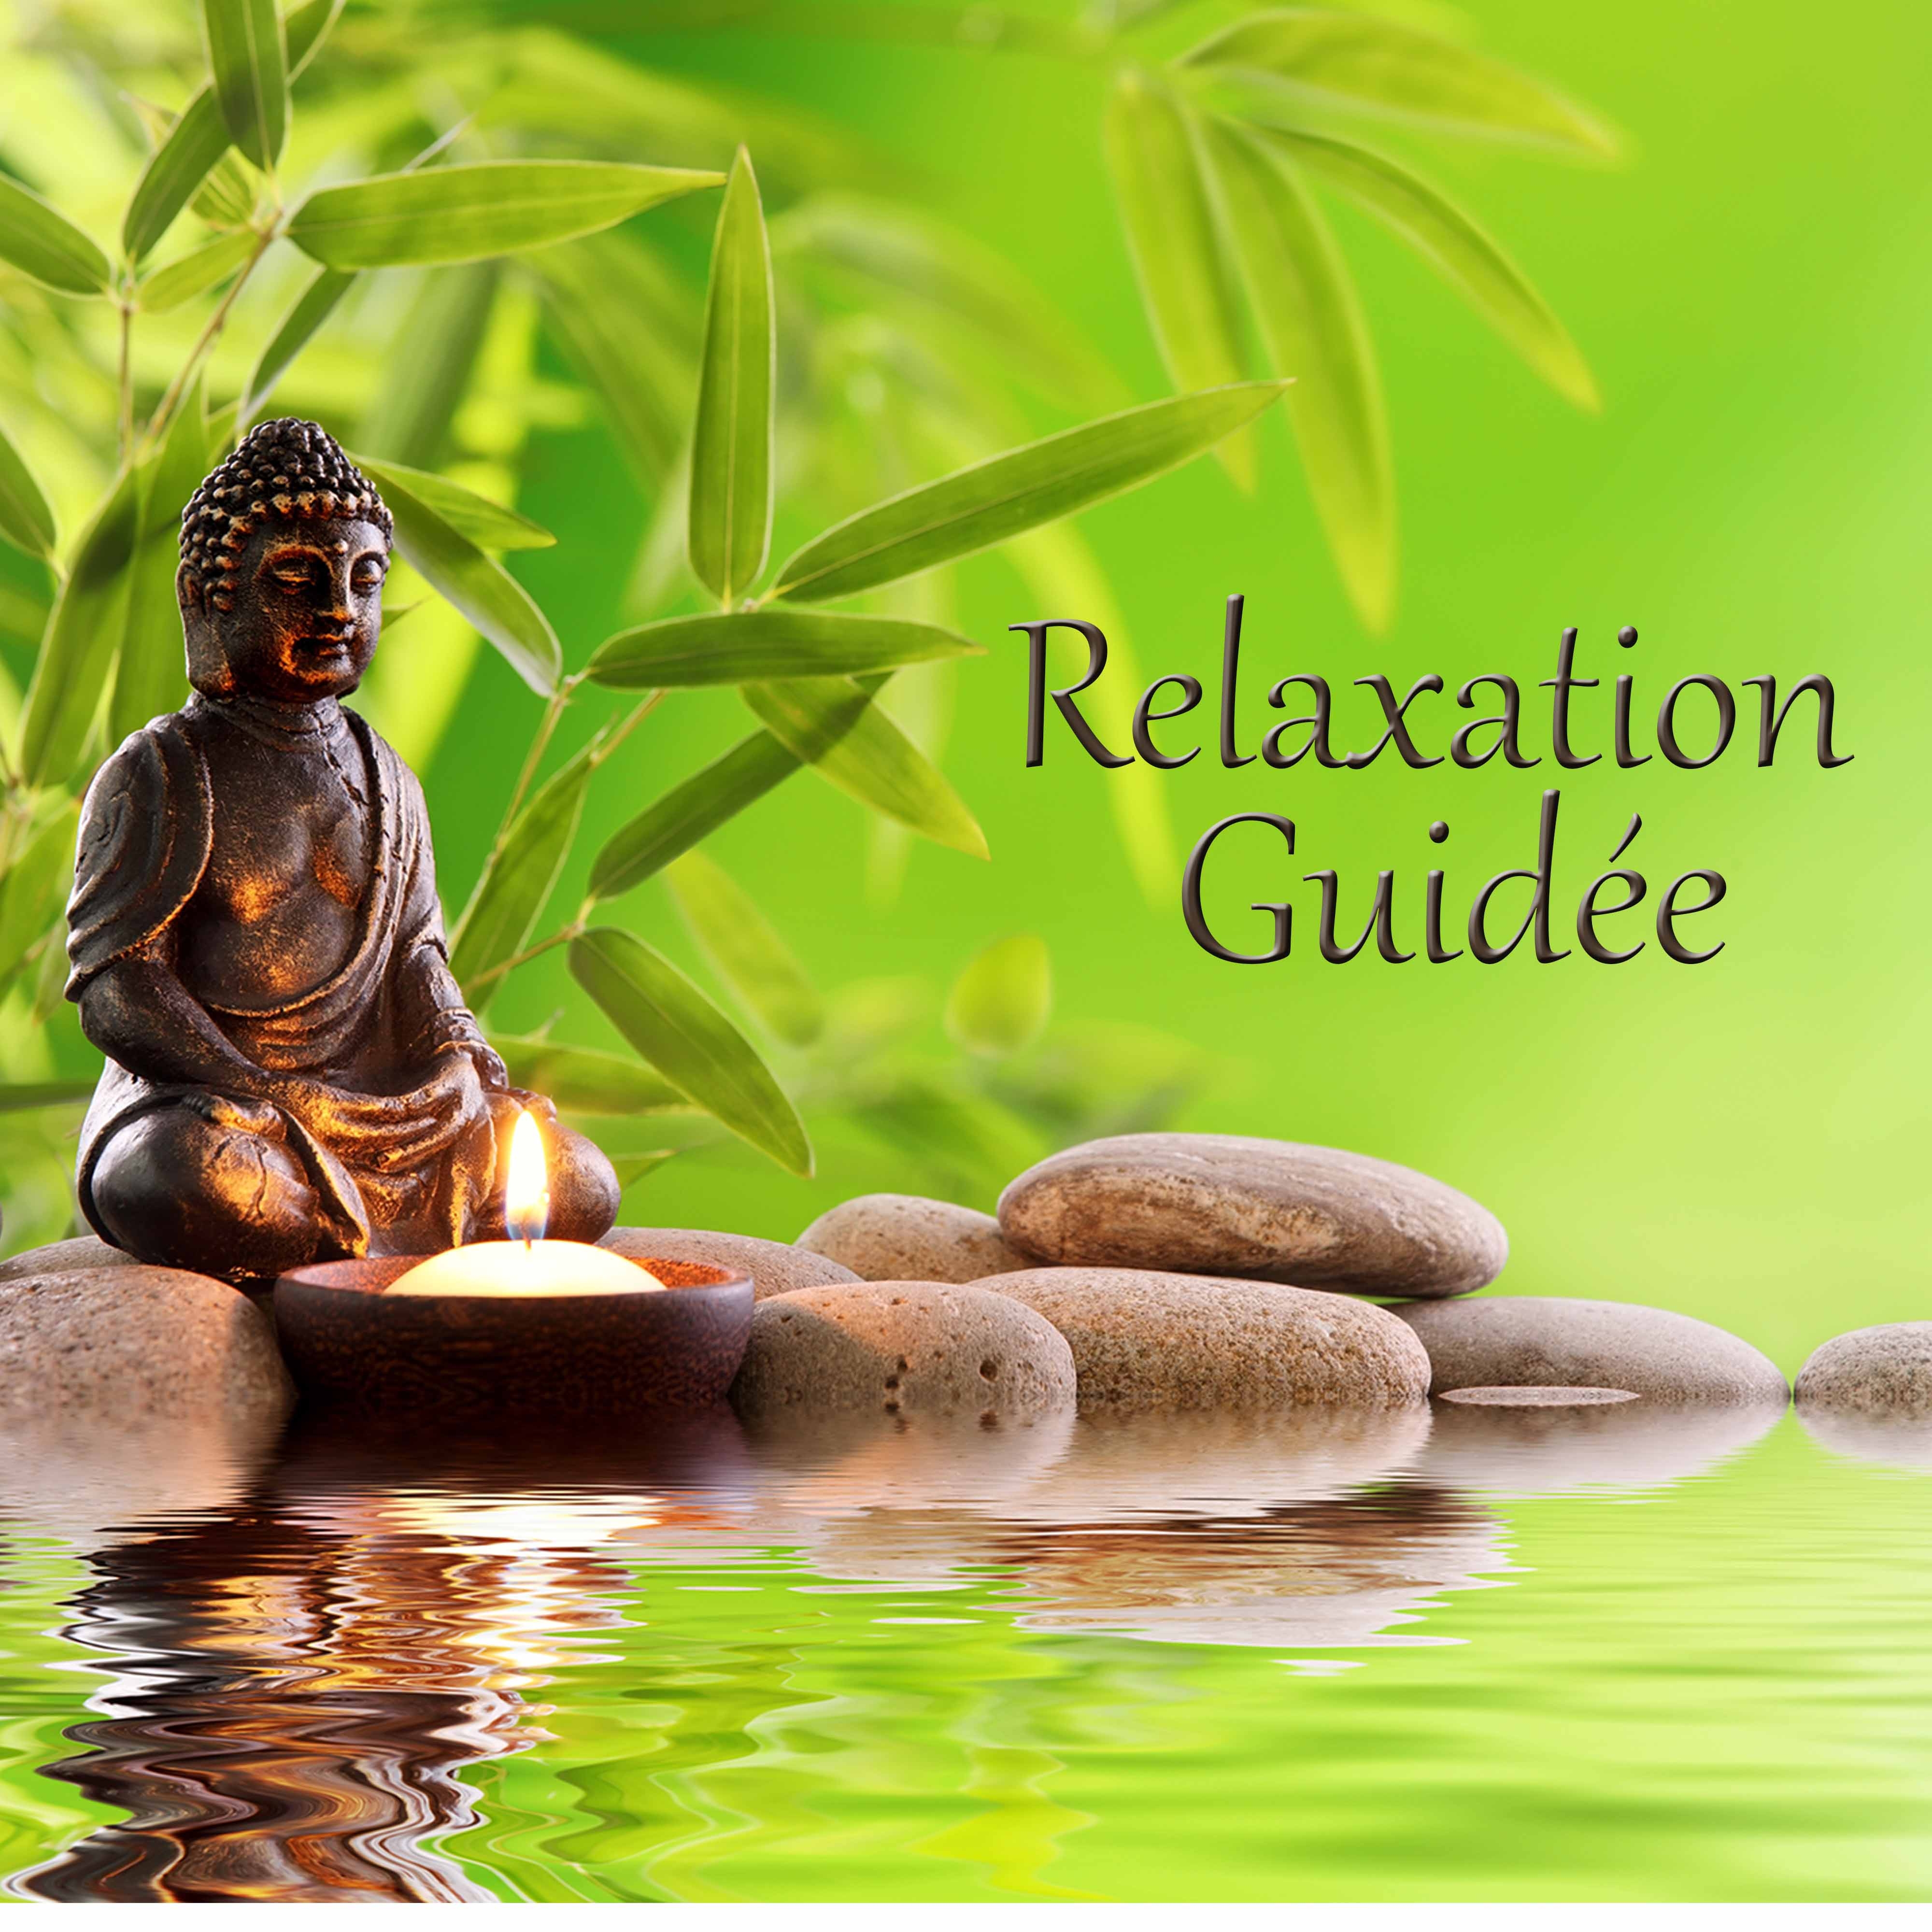 Relaxation guide e